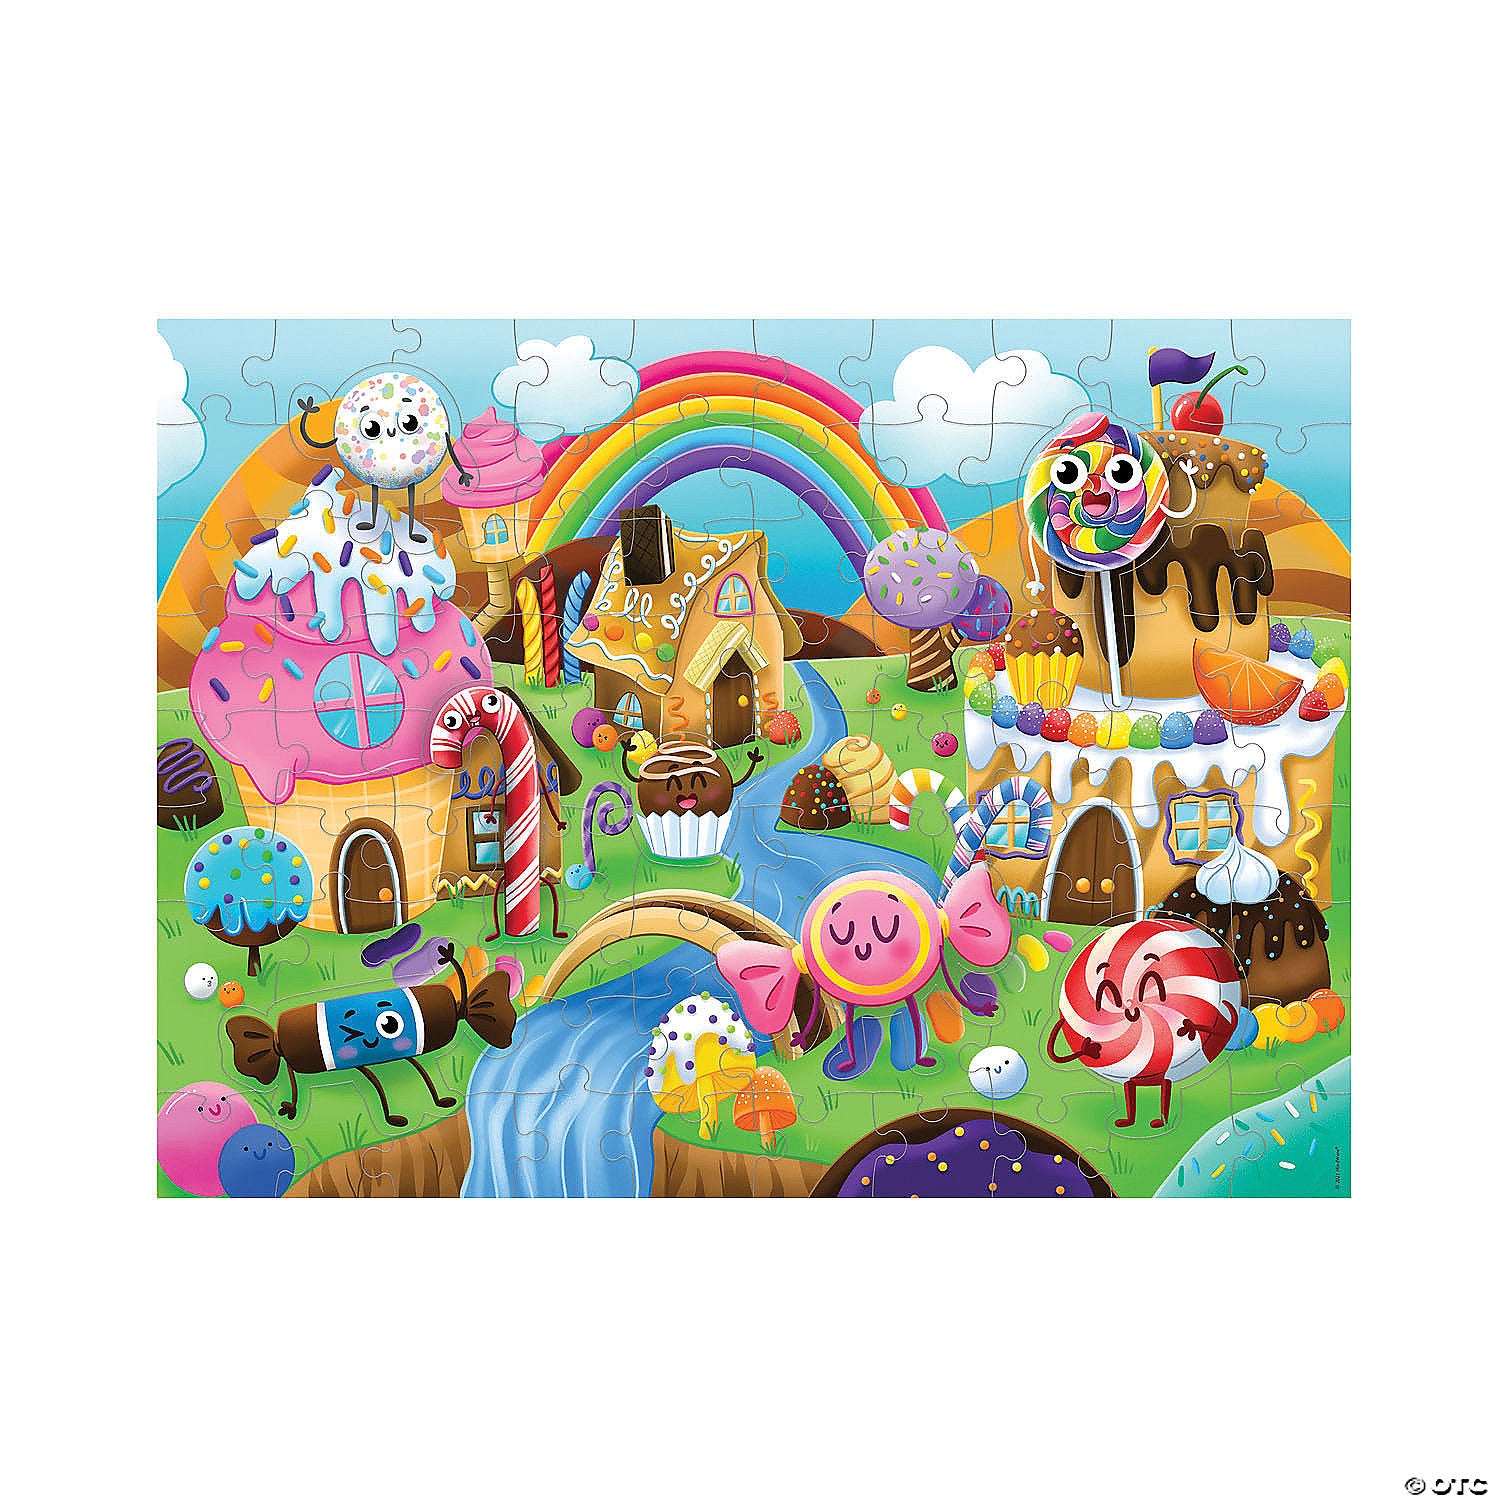 Scratch and Sniff Candy Kingdom Puzzle by Peaceable Kingdom